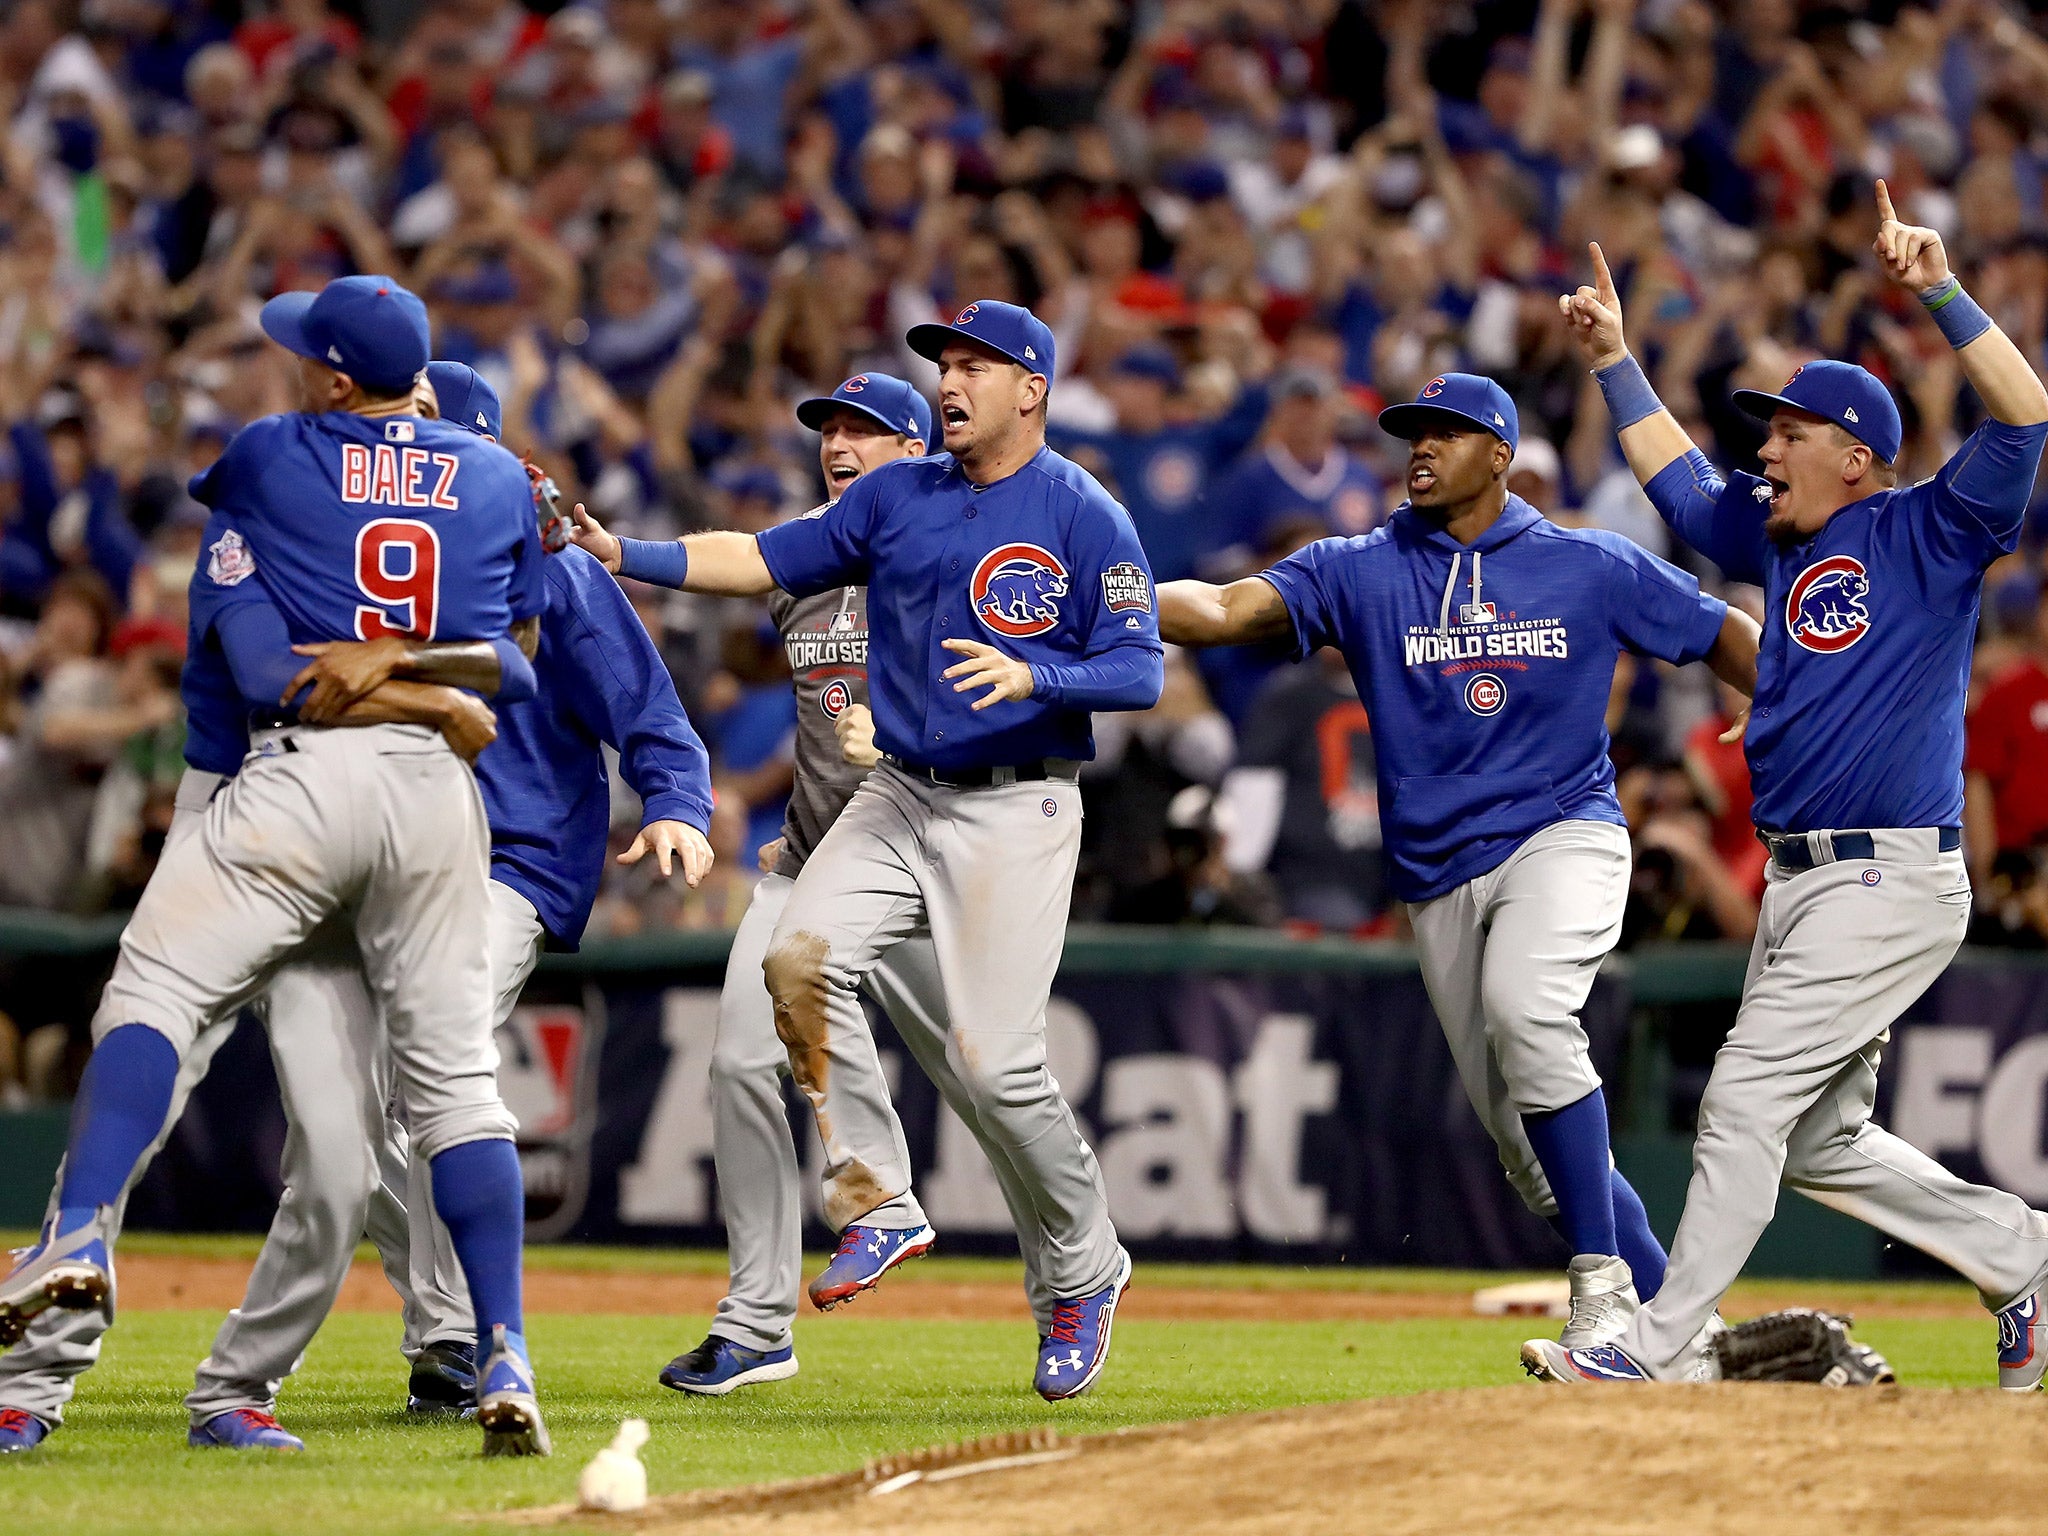 How the Cubs Won Game Seven and Ended Their 108-Year Drought